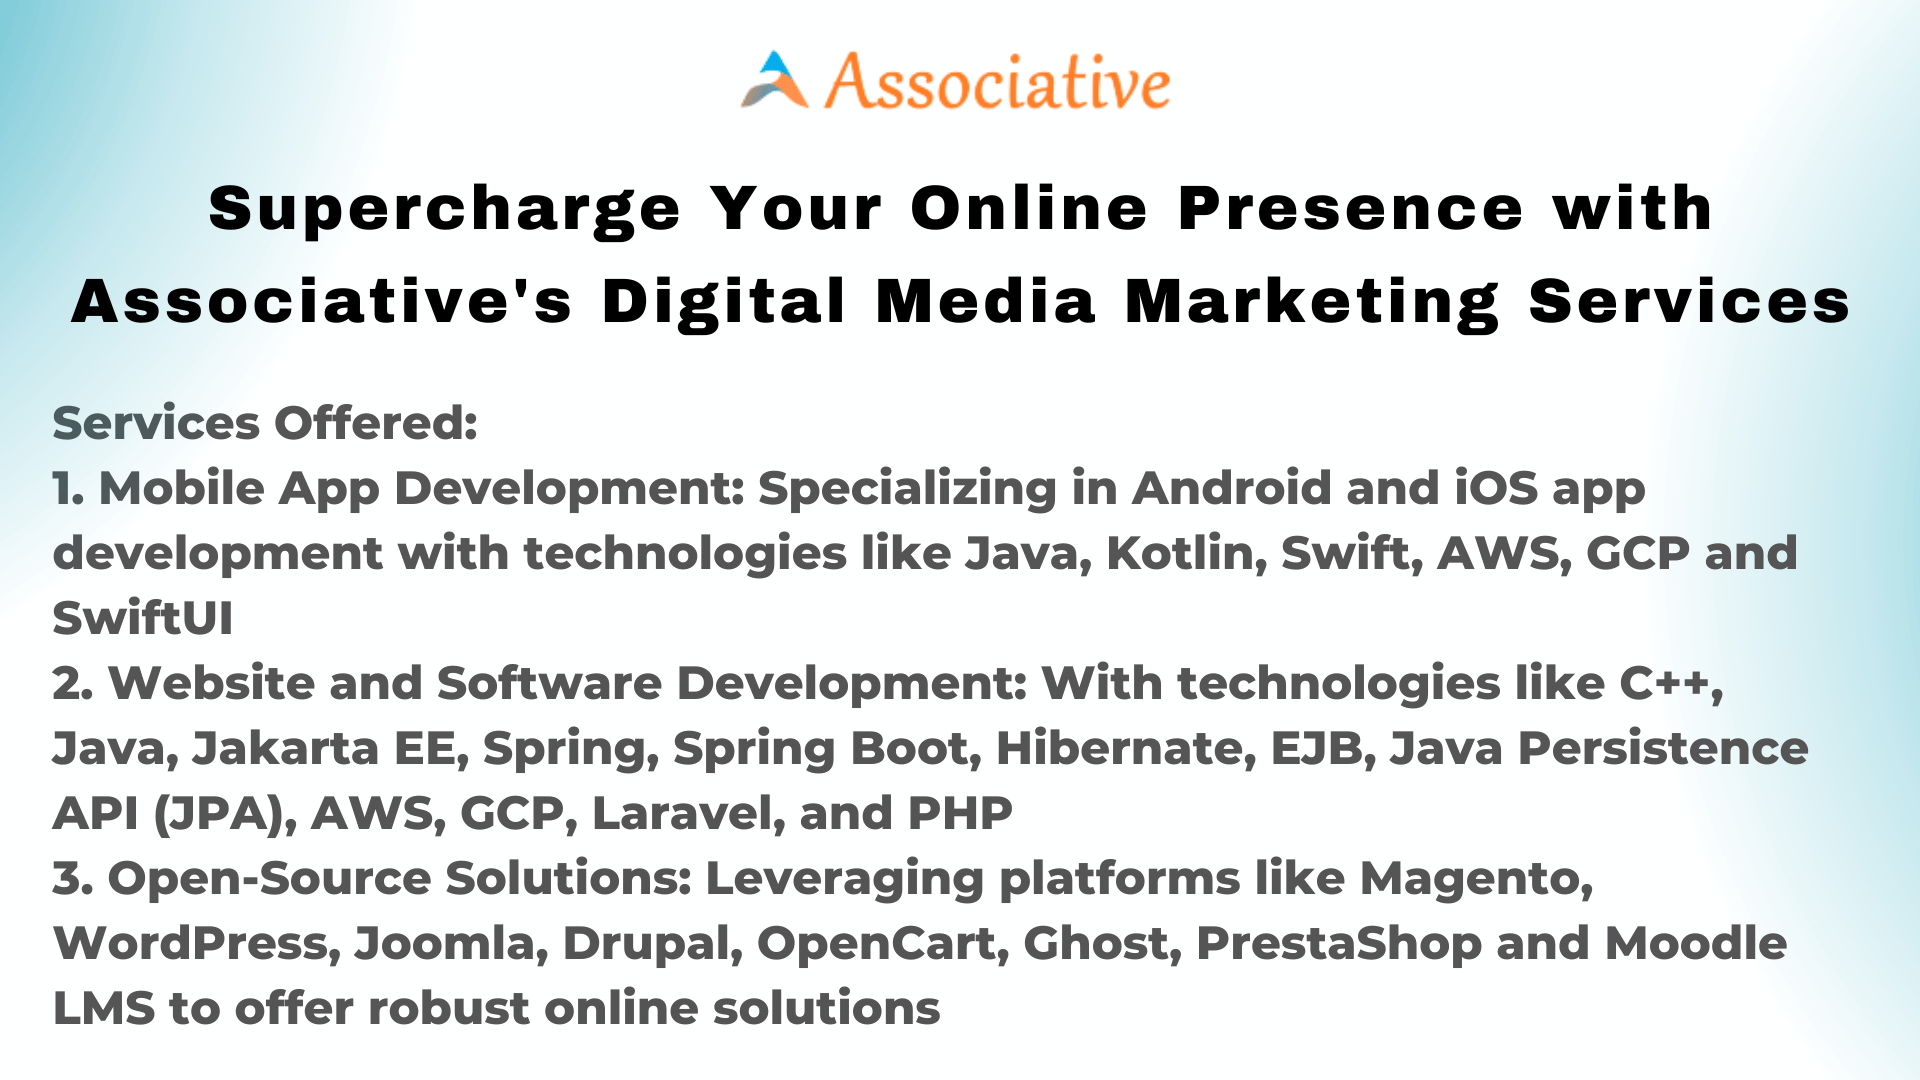 Supercharge Your Online Presence with Associative's Digital Media Marketing Services